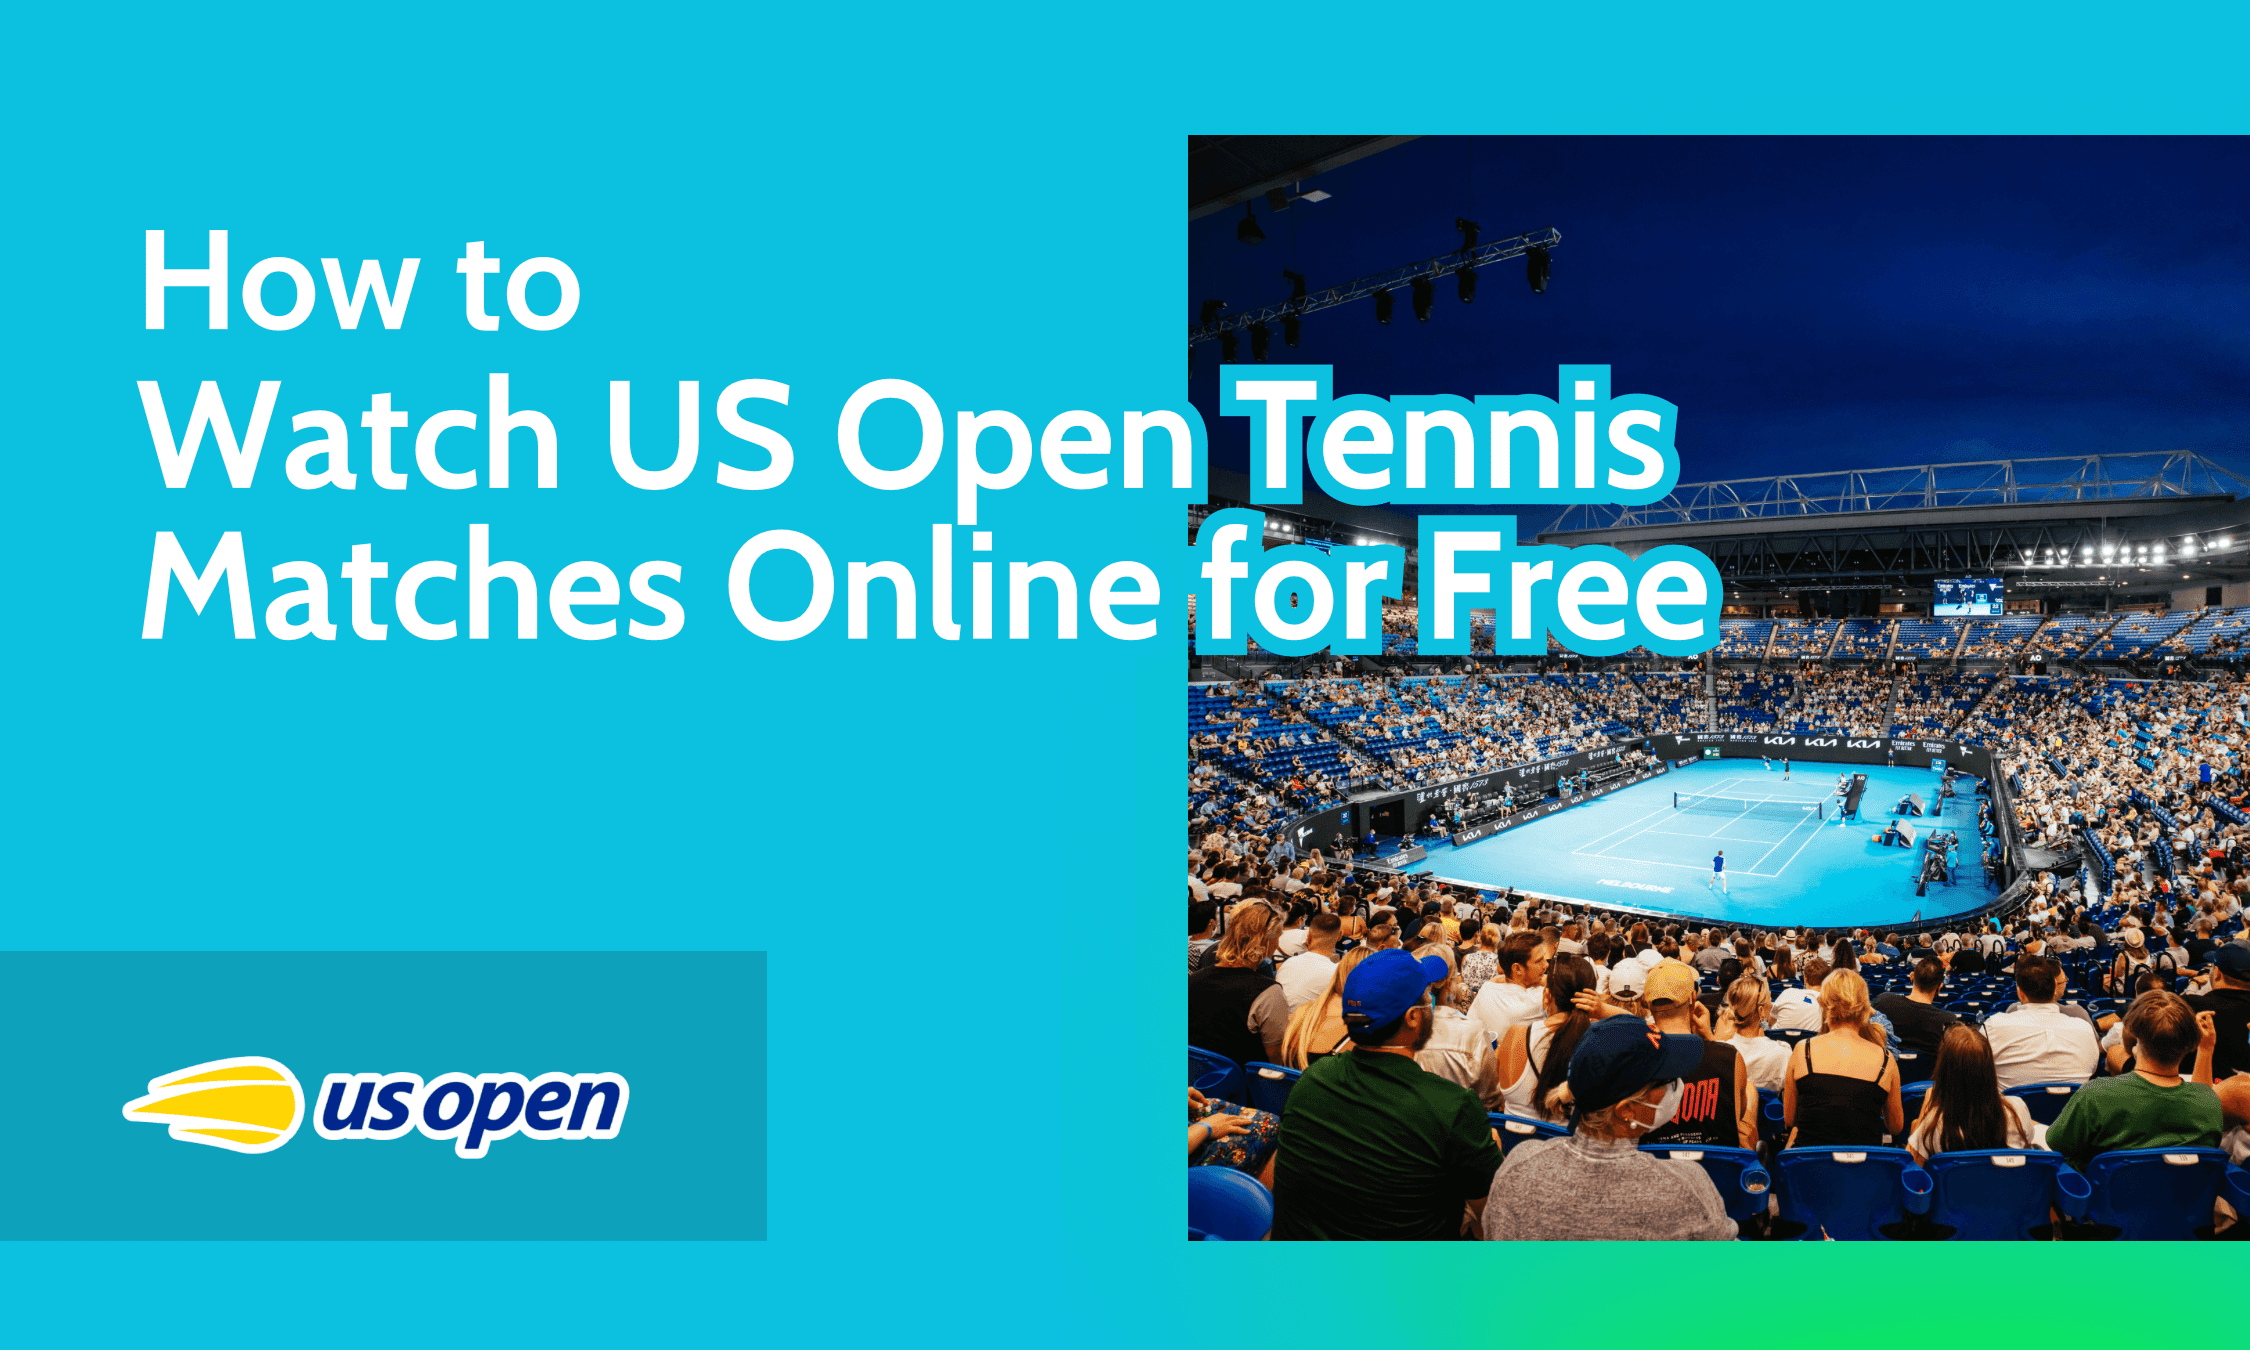 How to Watch US Open Tennis Matches Online for Free